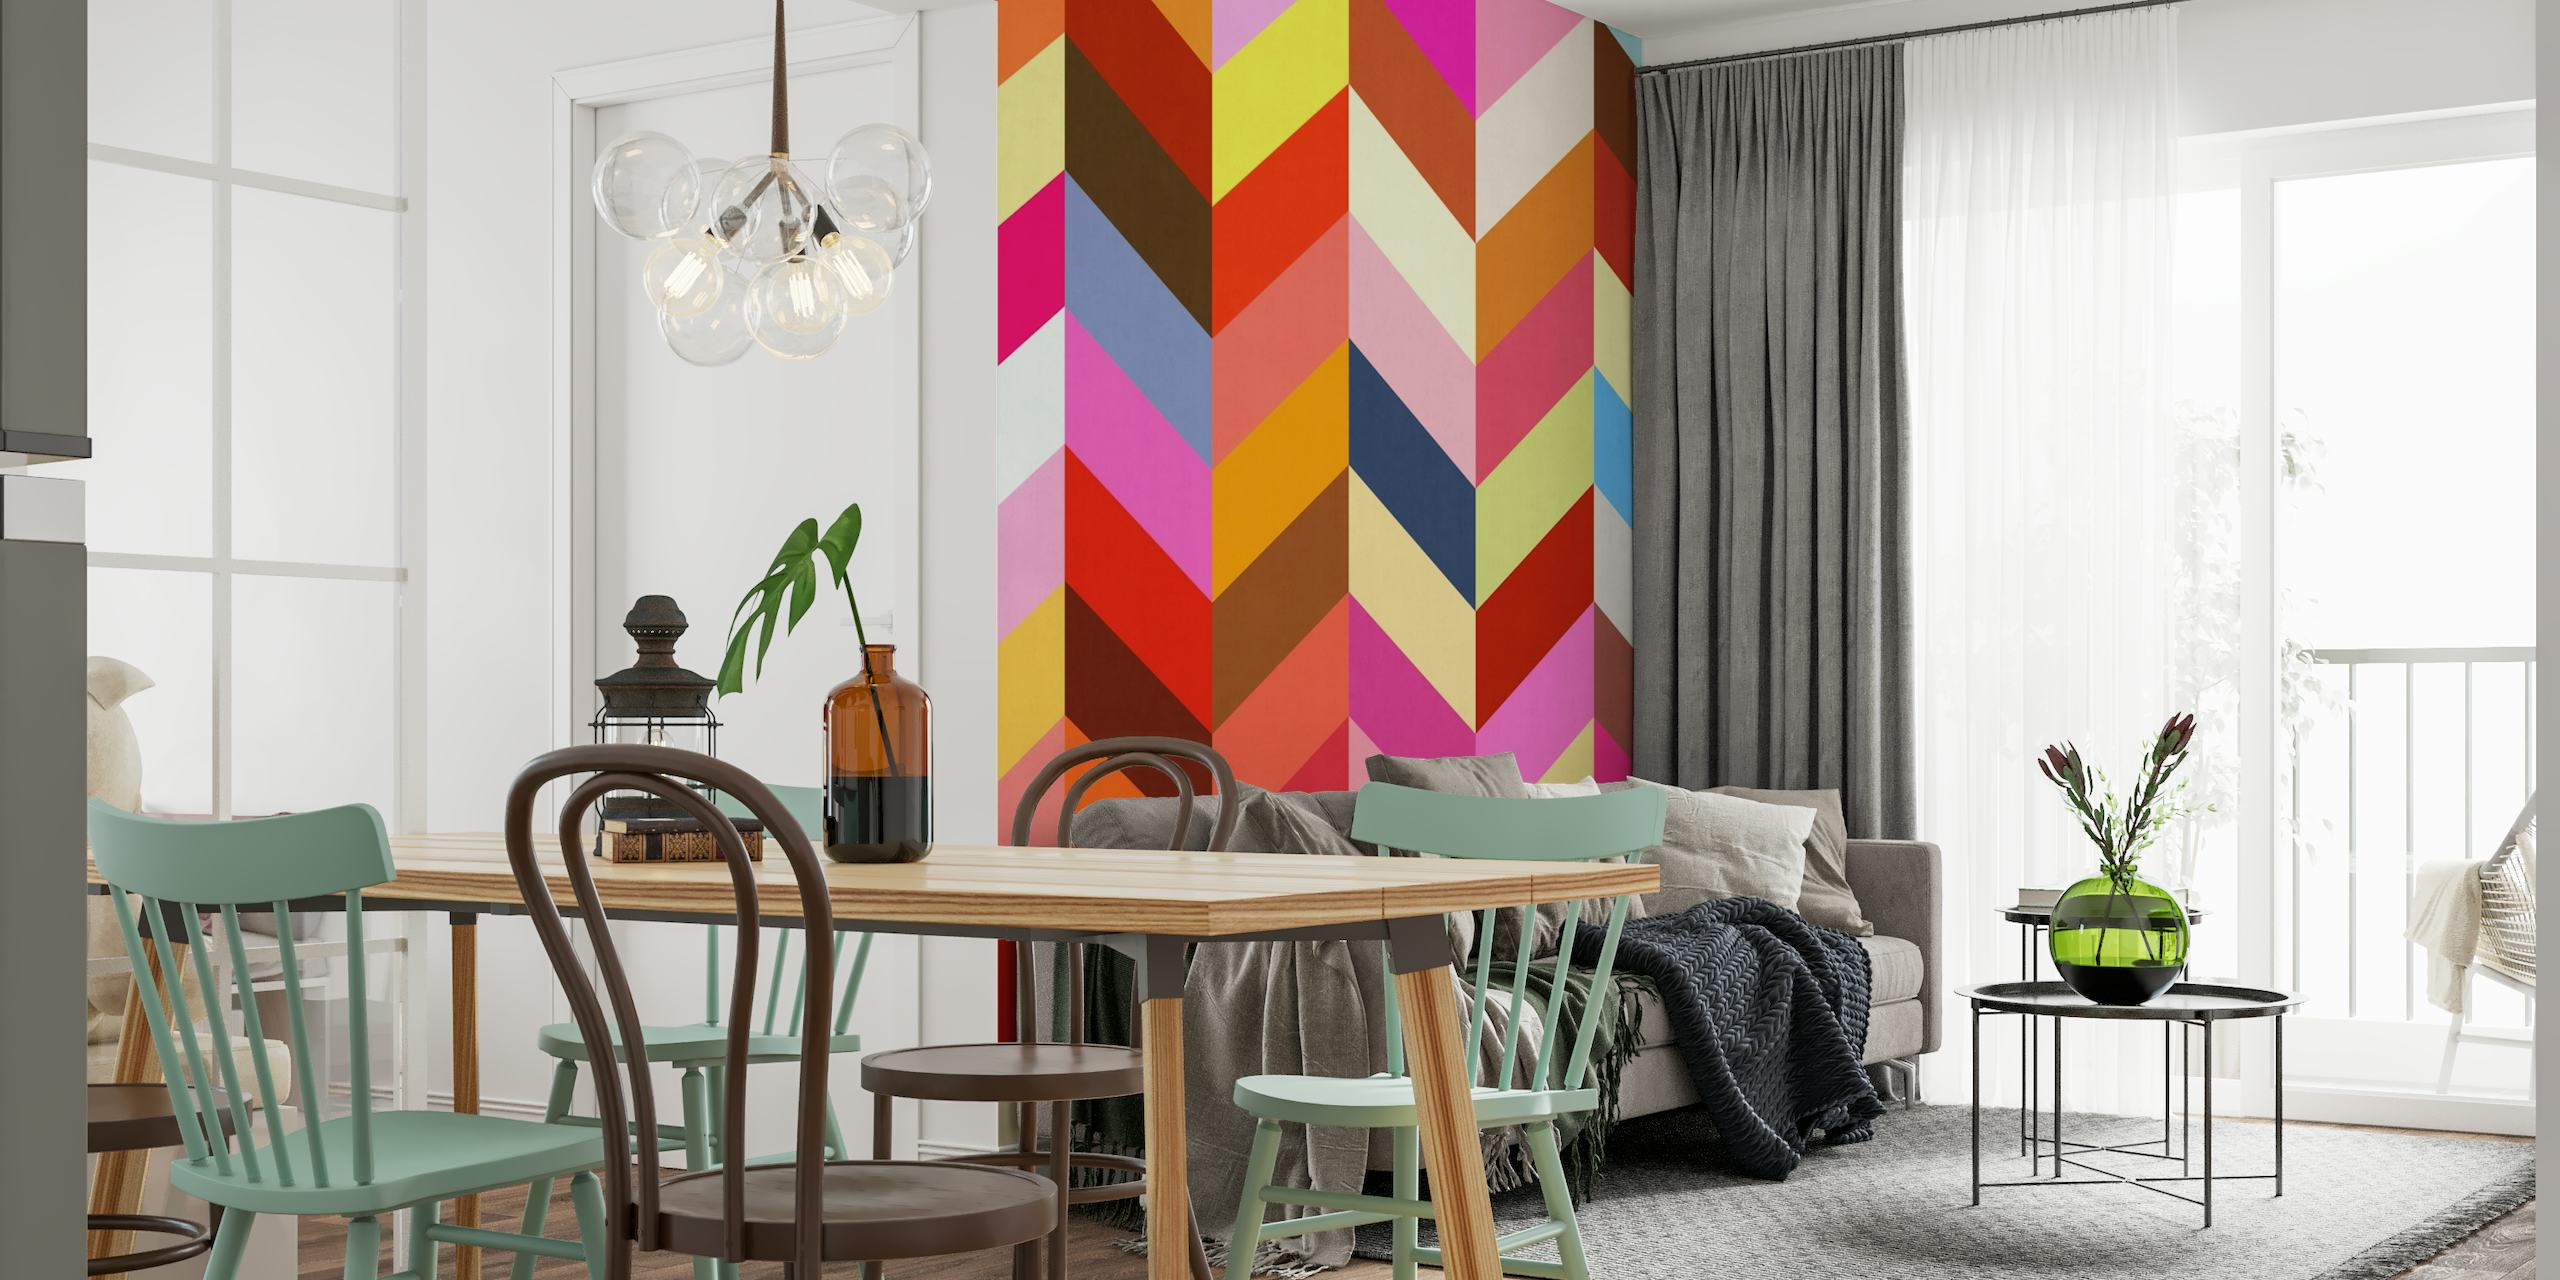 Colored Pattern I wallpaper